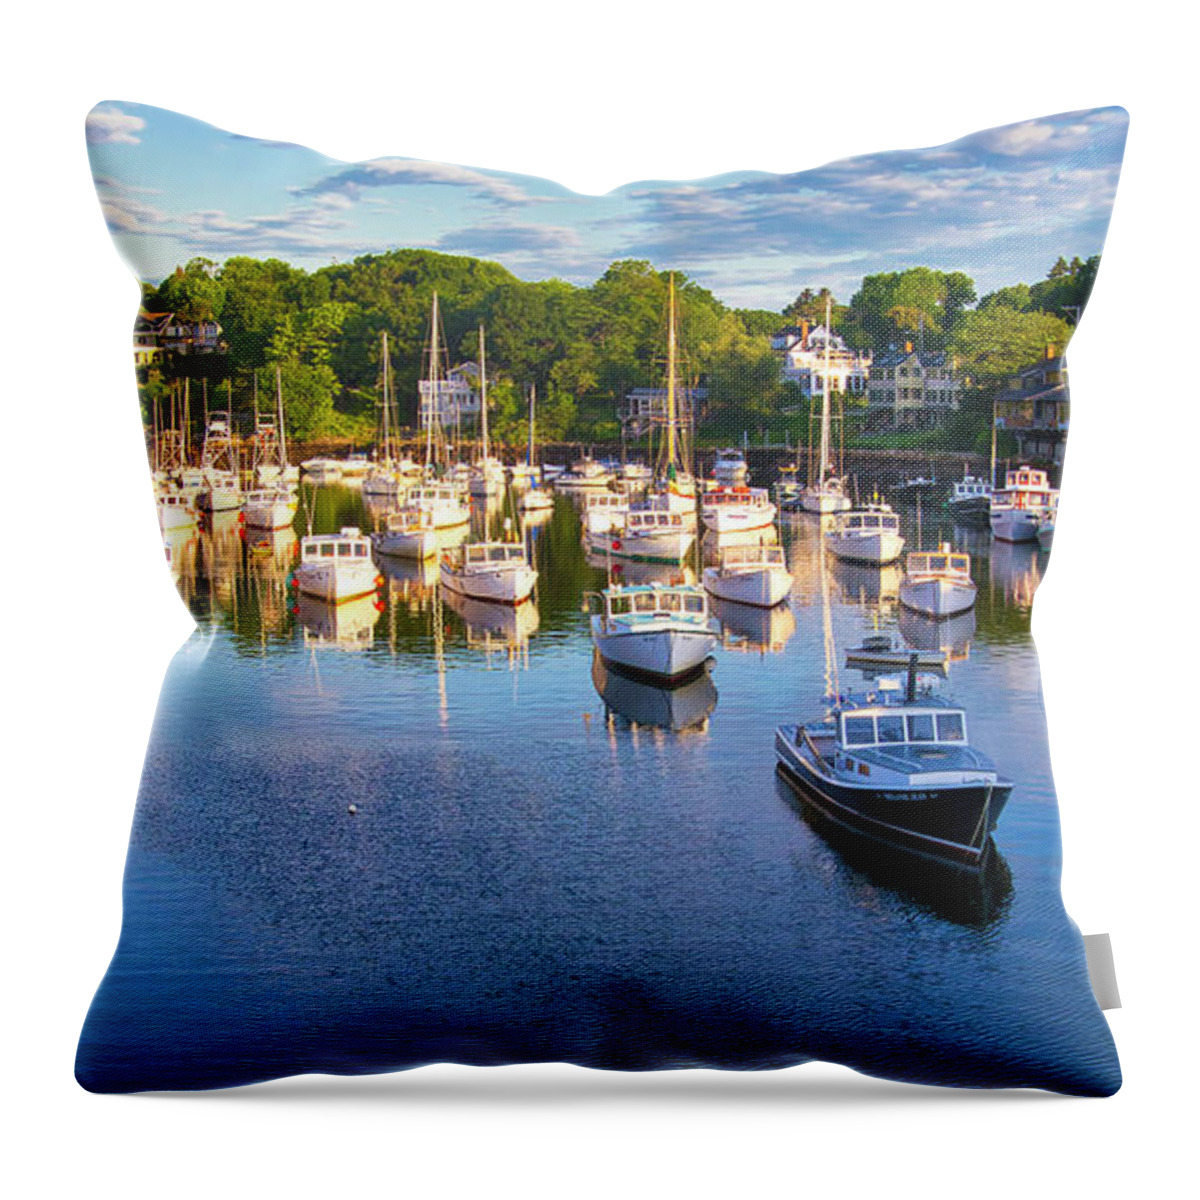 Boat Throw Pillow featuring the photograph Lobster Boats - Perkins Cove - Maine #2 by Steven Ralser